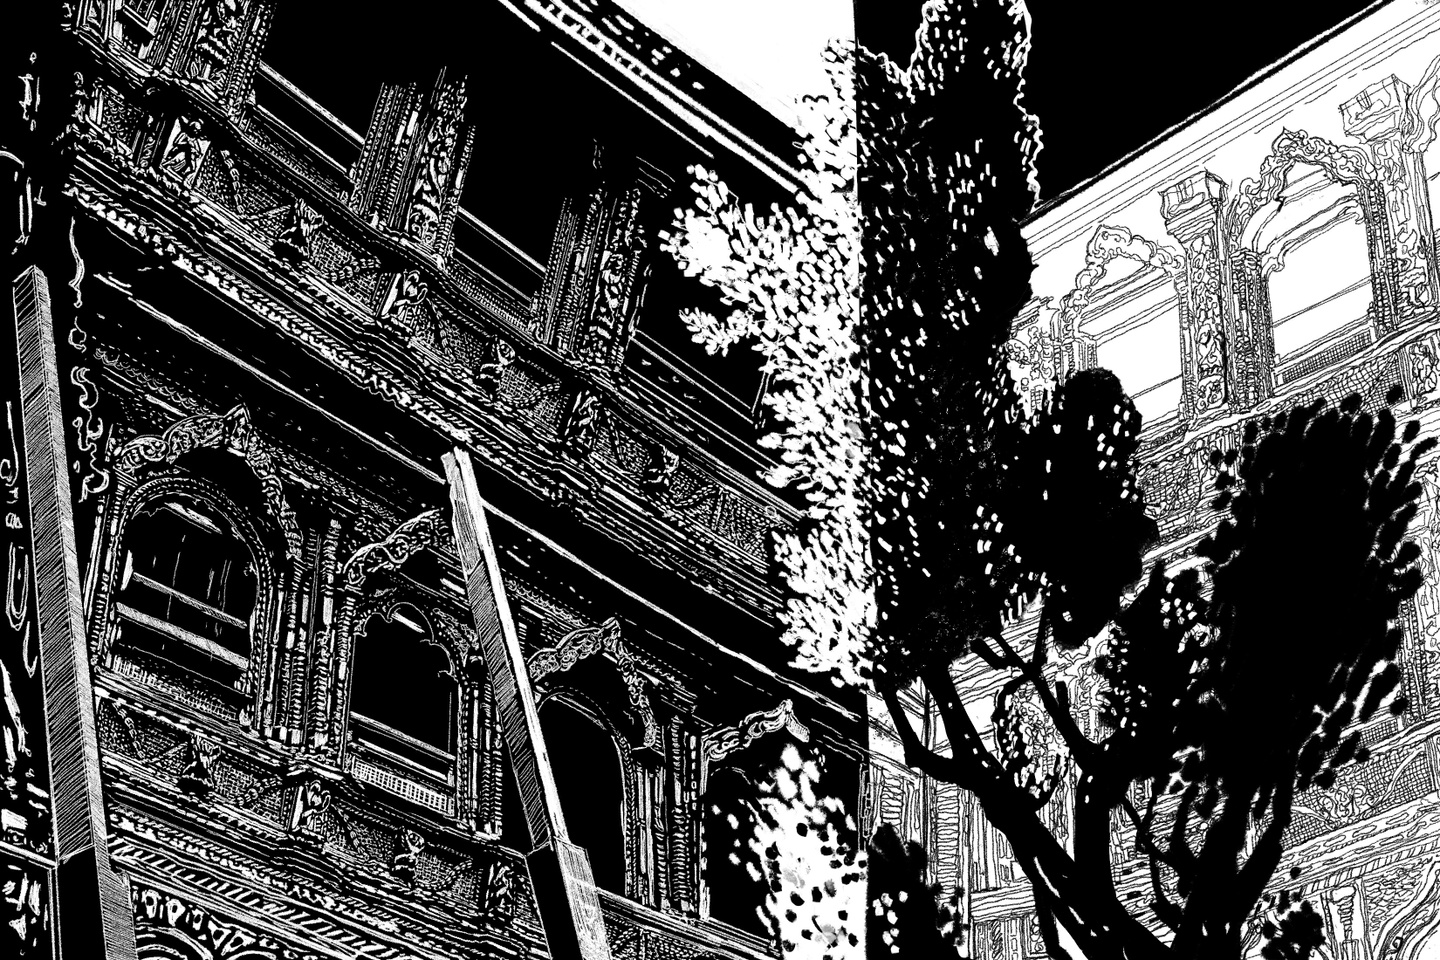 Highly detailed black and white drawing of a facade of a highly ornate mansion or temple.